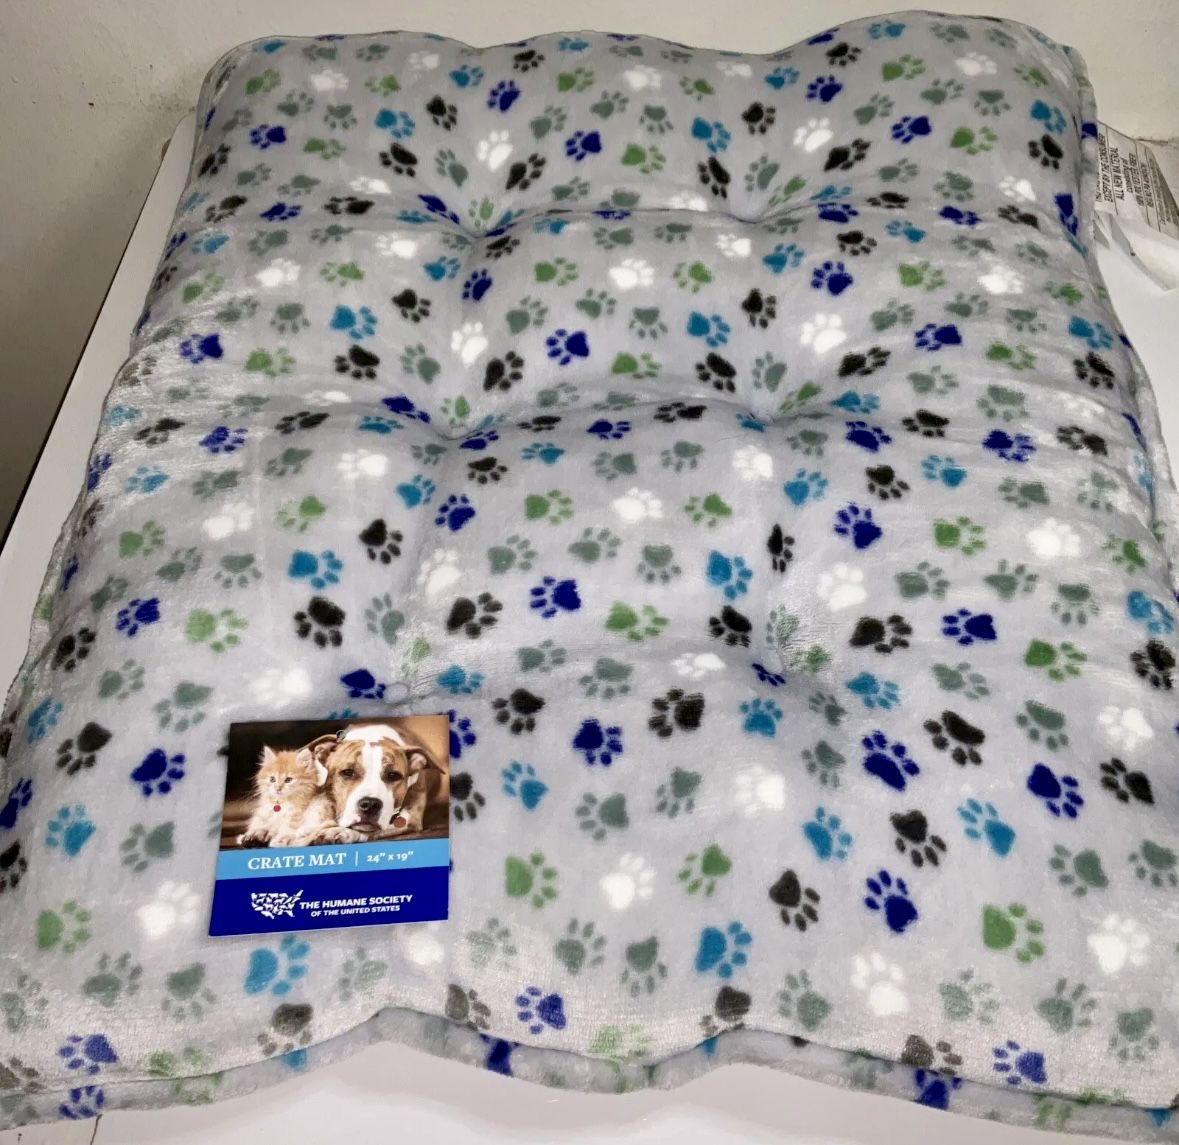 New The Human Society Grate Mat 24”x19” For Cat And Small Dog’s Bed